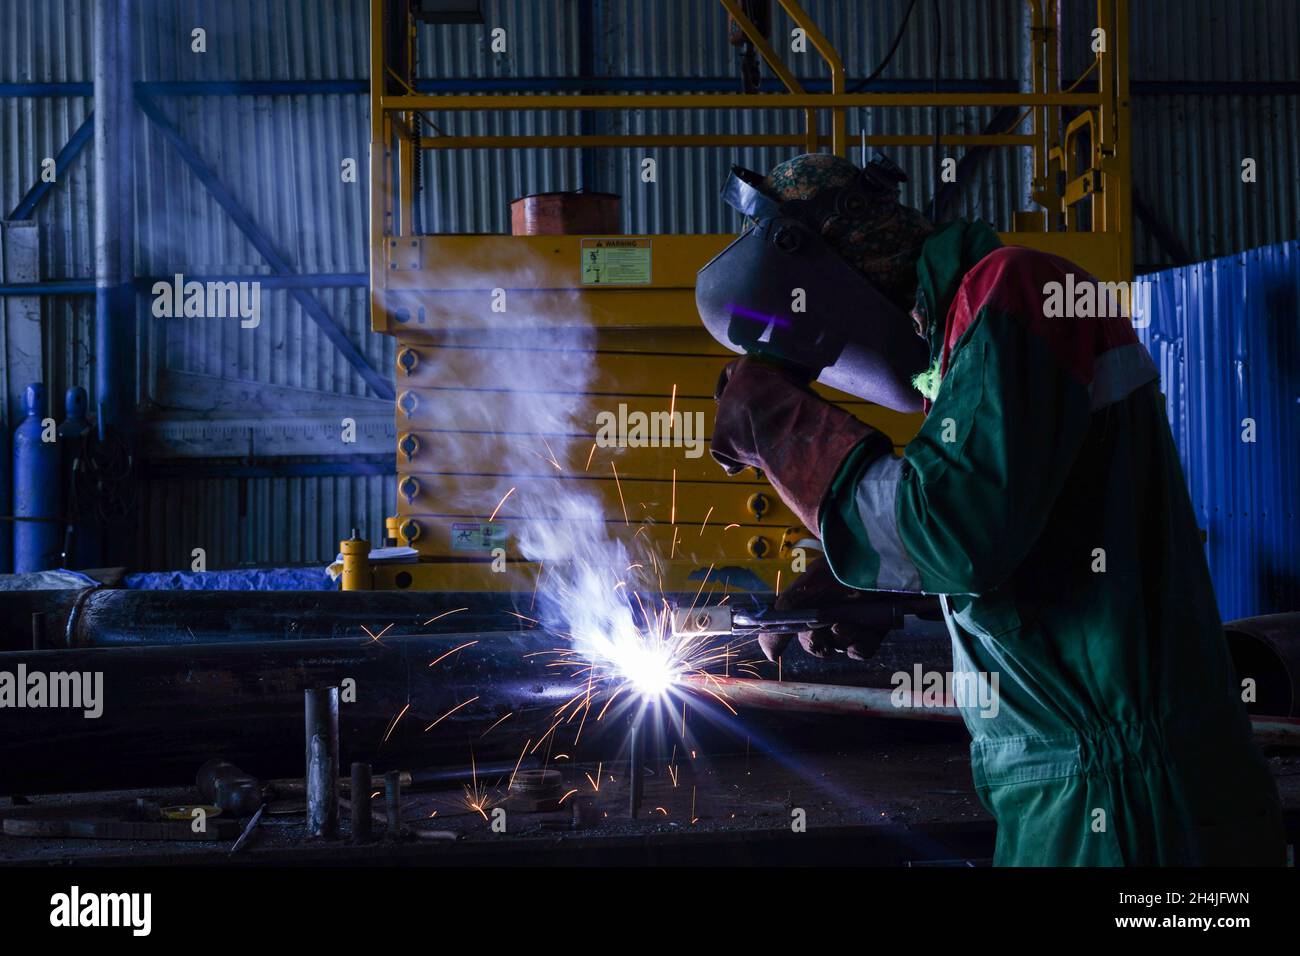 Welding works at workshop Stock Photo